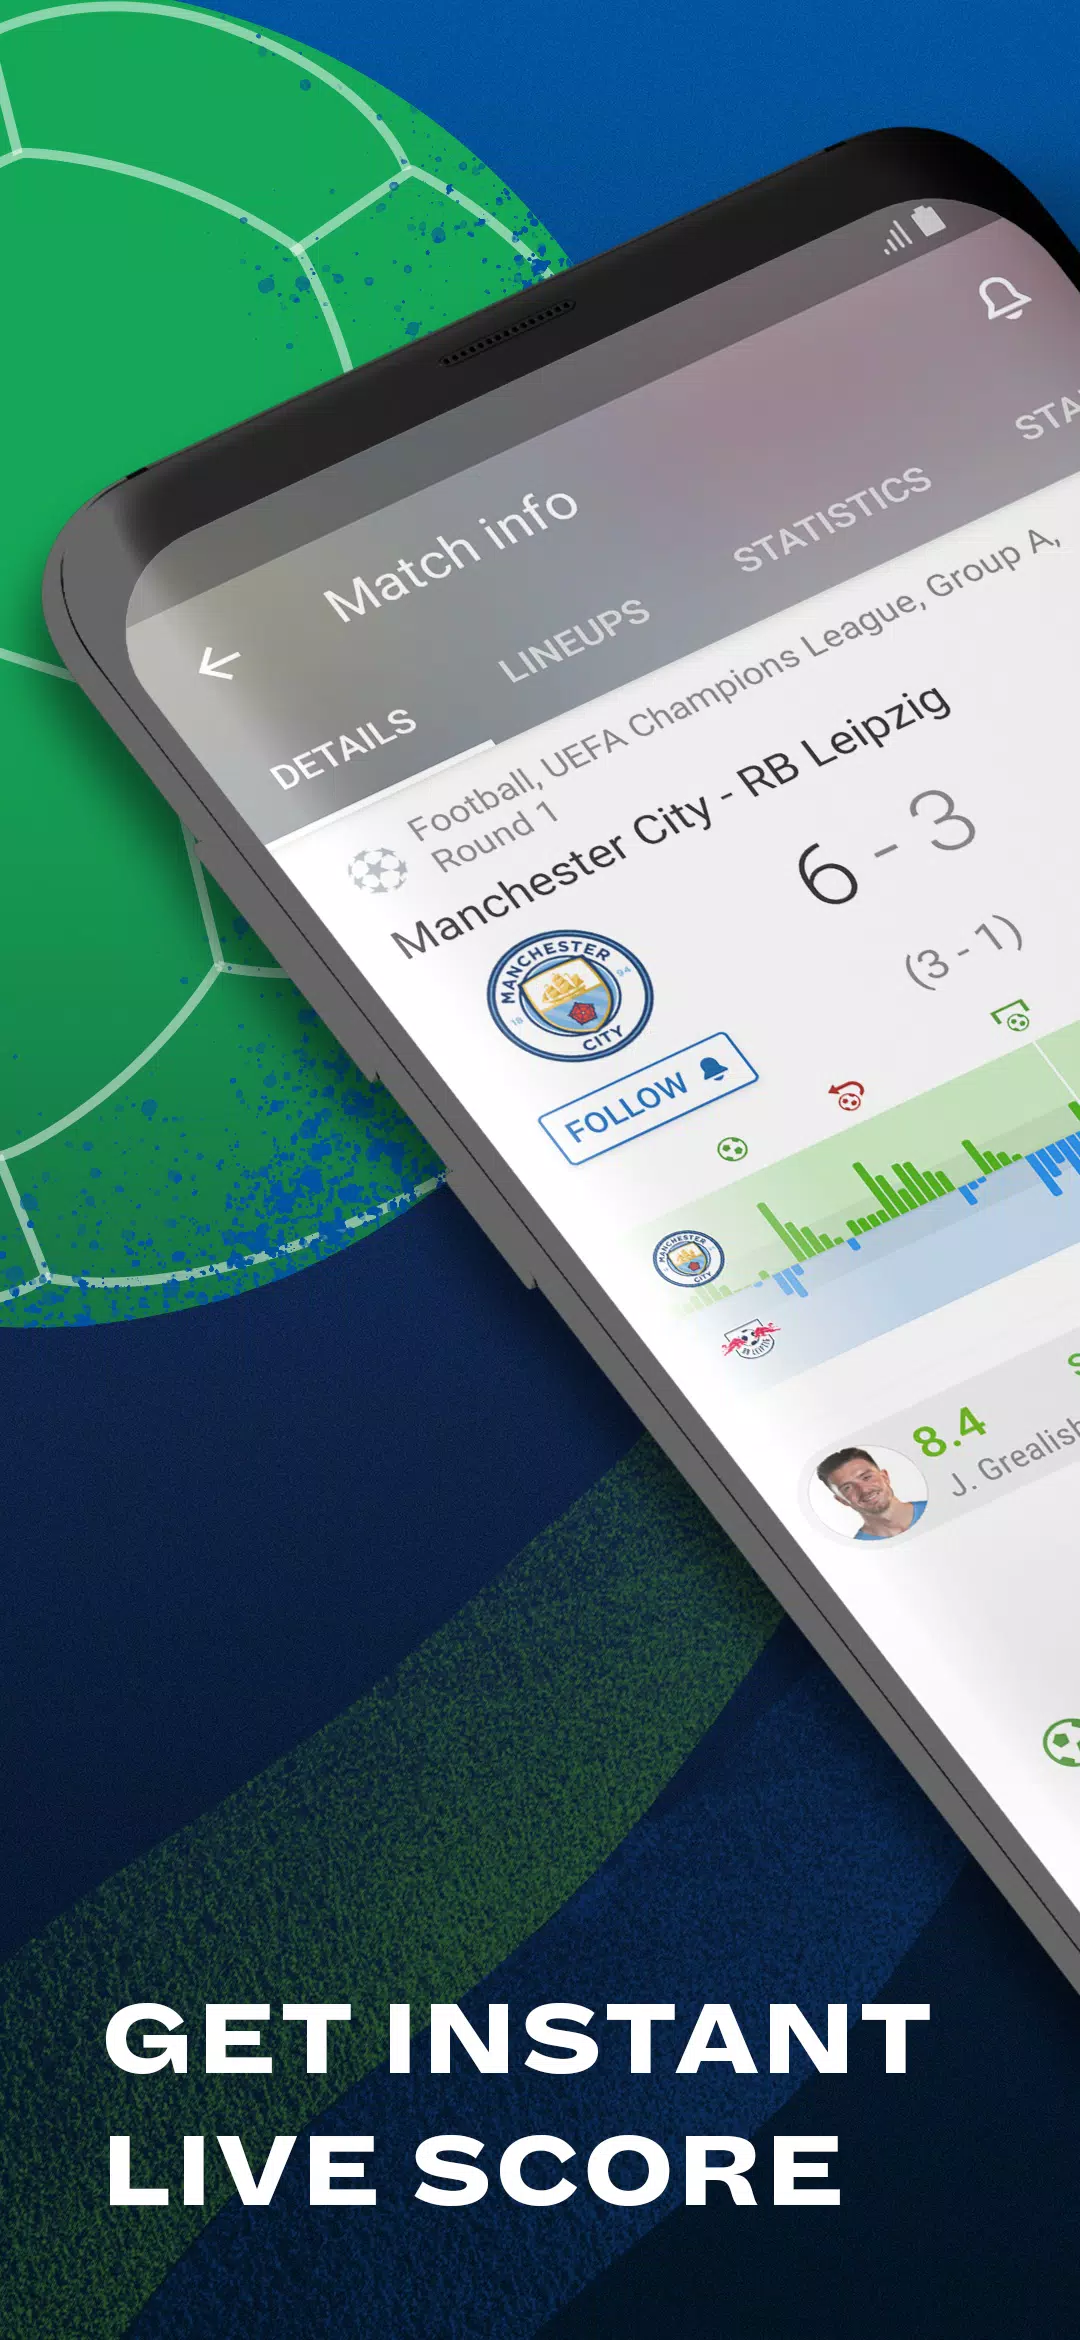 Soccer live scores - SofaScore for Android - APK Download